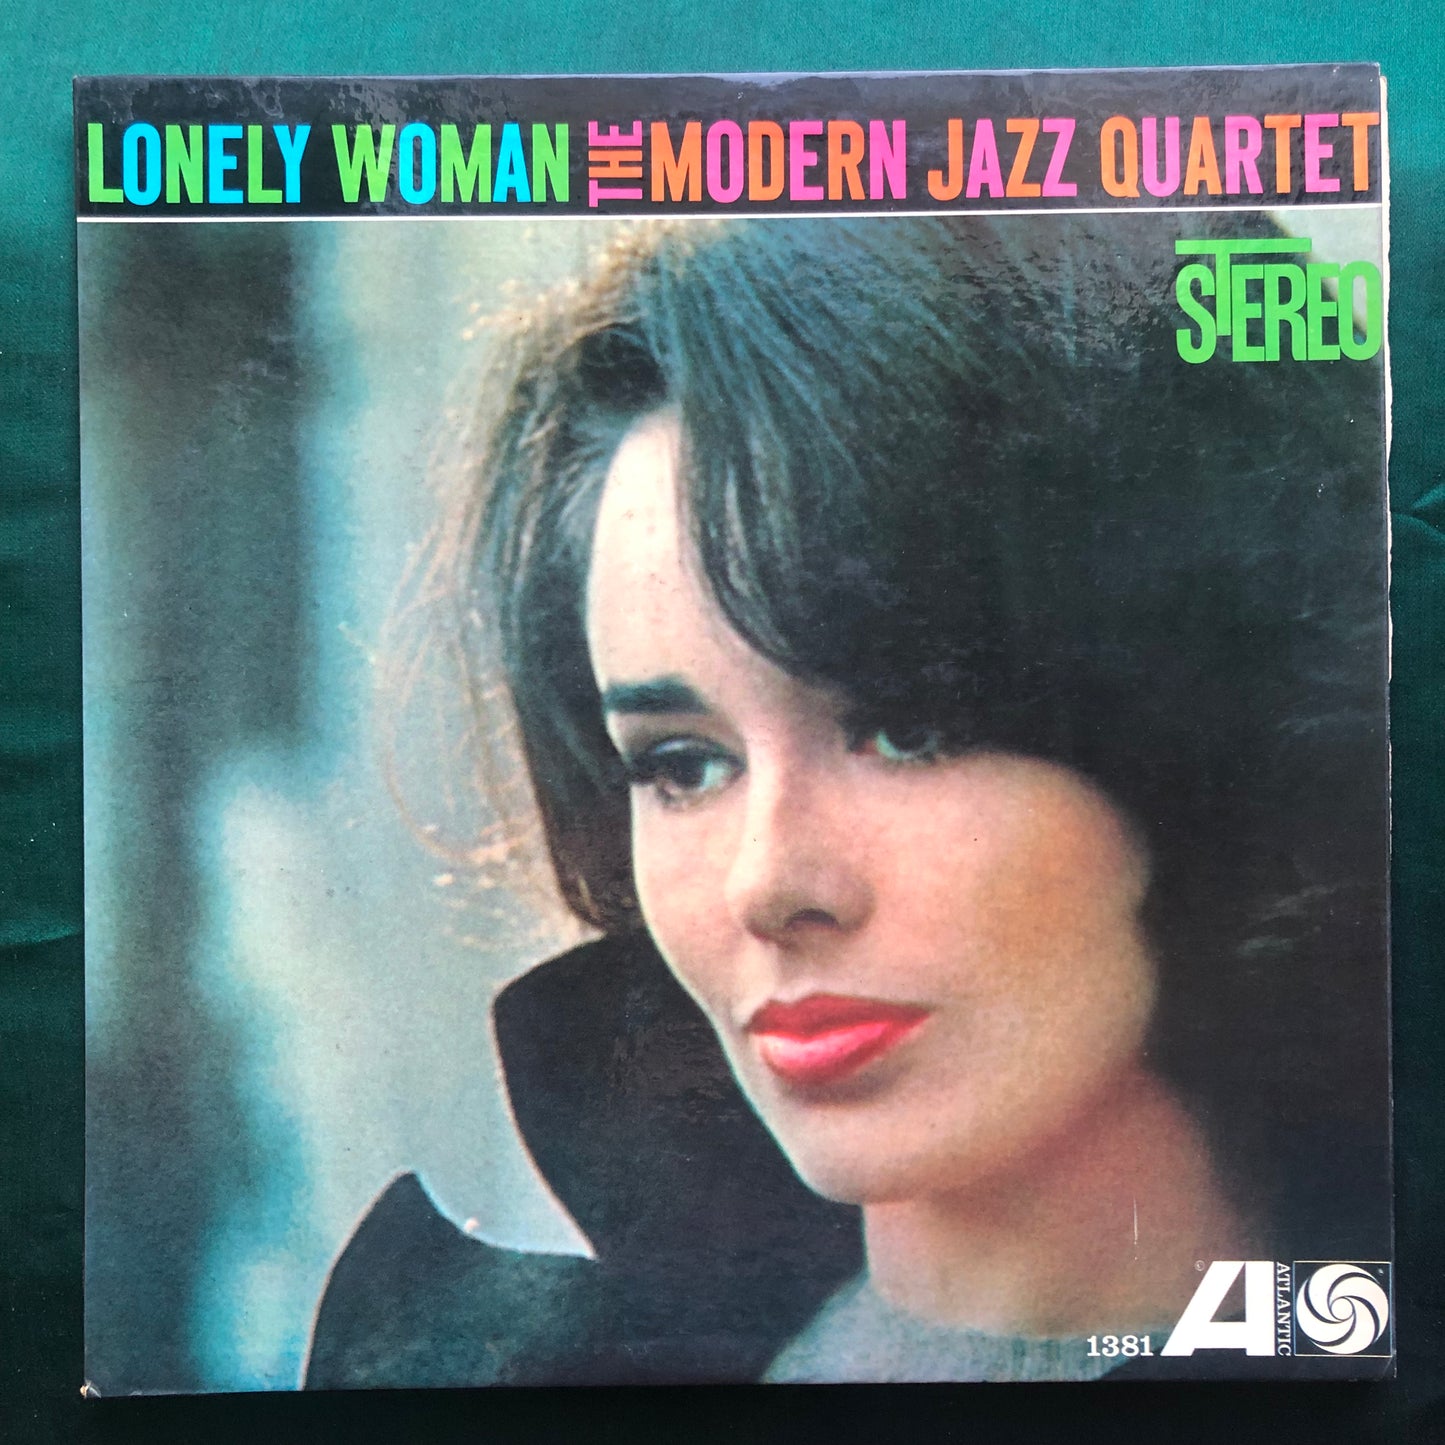 MJQ - Lonely Woman 1962 1st Stereo Press Atlantic